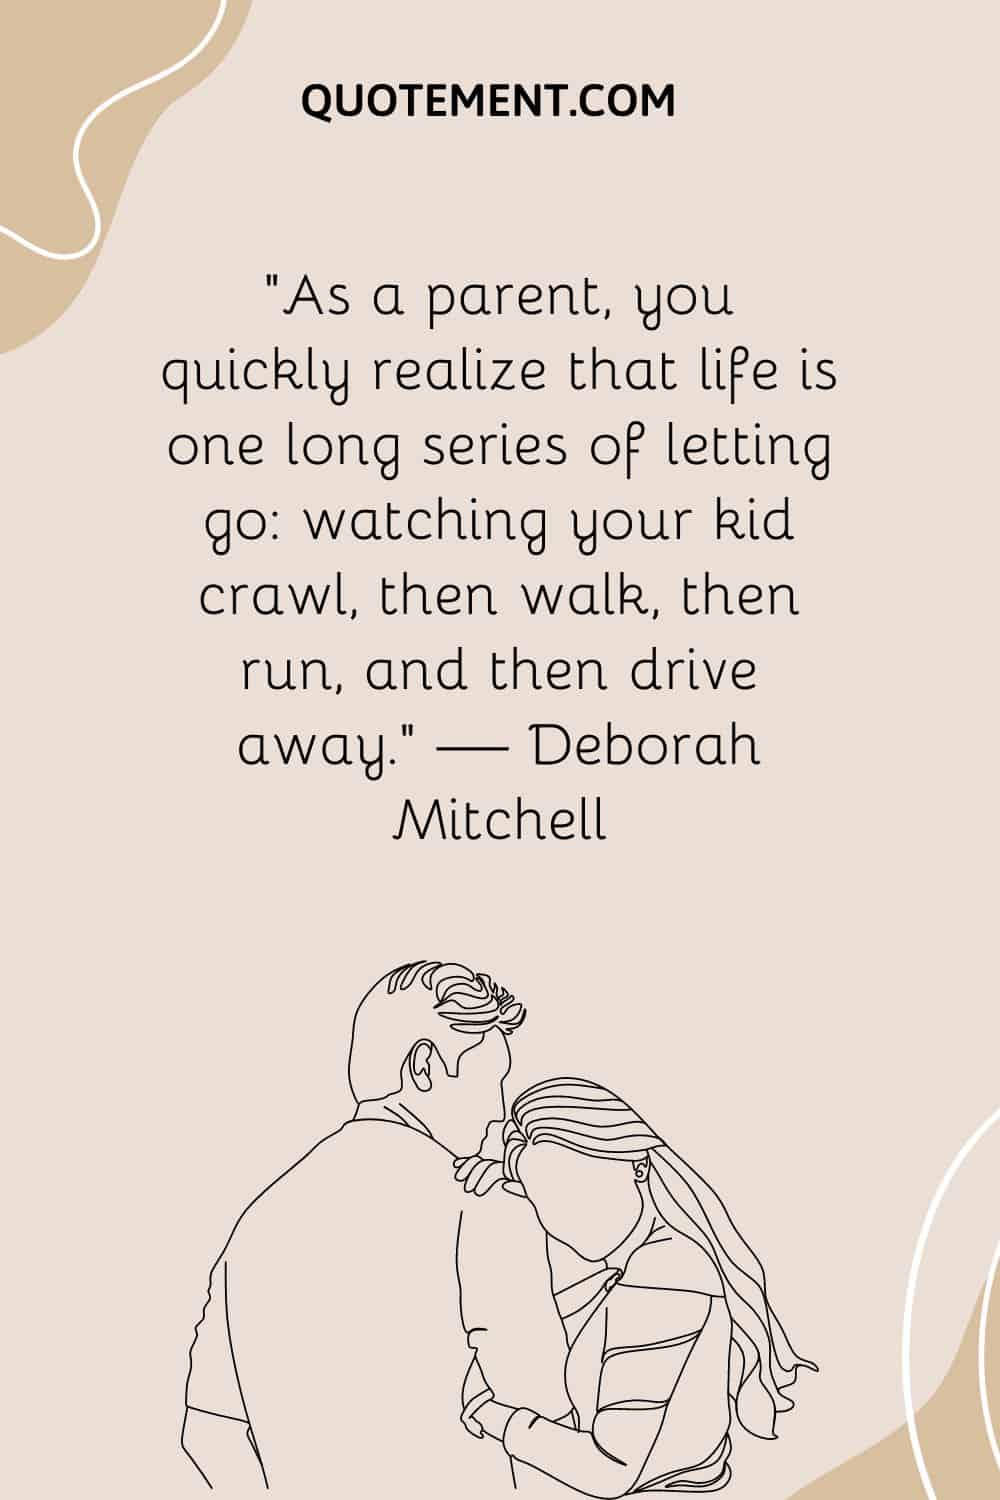 “As a parent, you quickly realize that life is one long series of letting go watching your kid crawl, then walk, then run, and then drive away.” — Deborah Mitchell